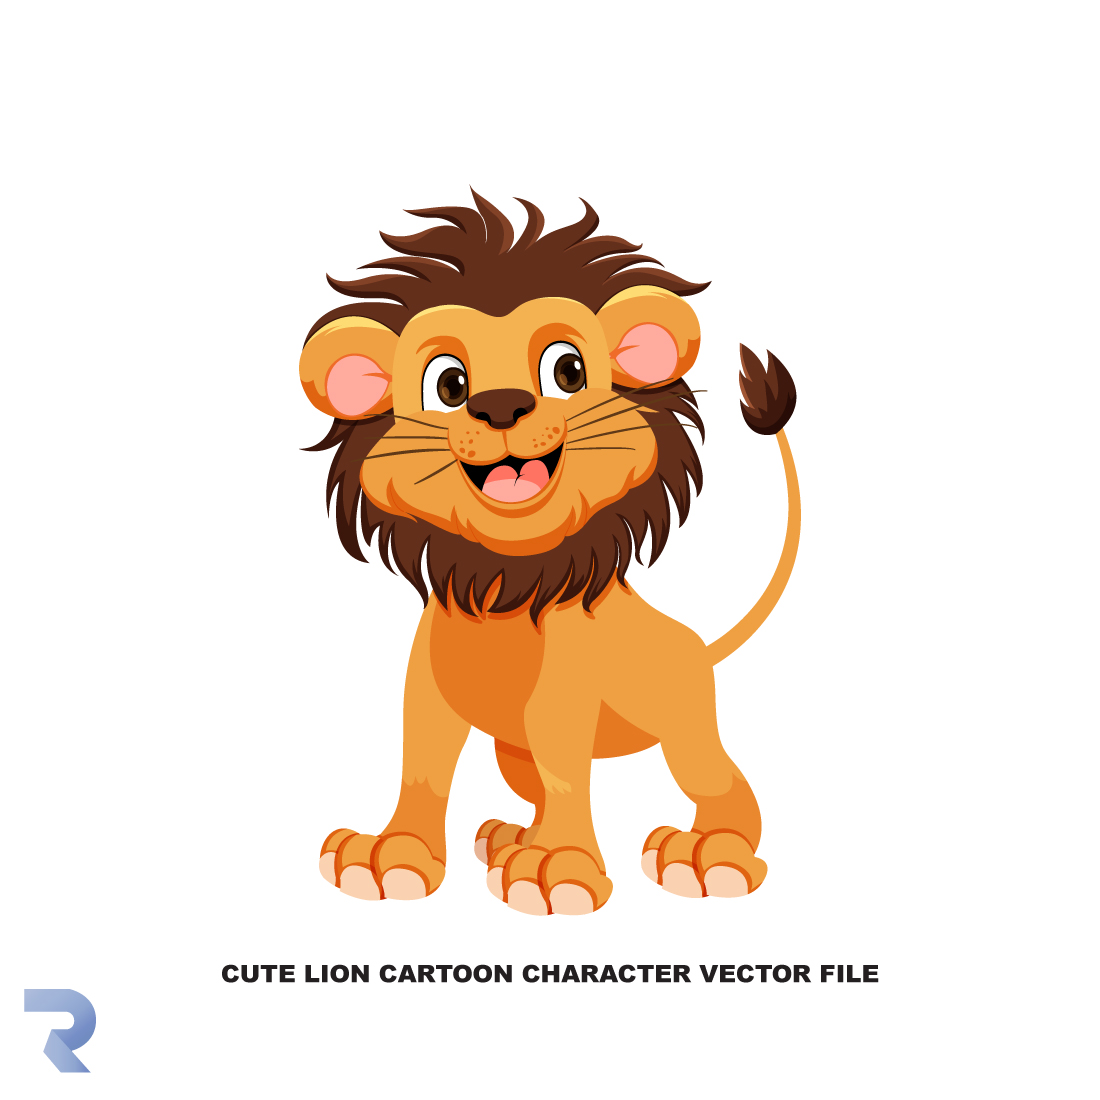 Cute lion cartoon character vector file cover image.